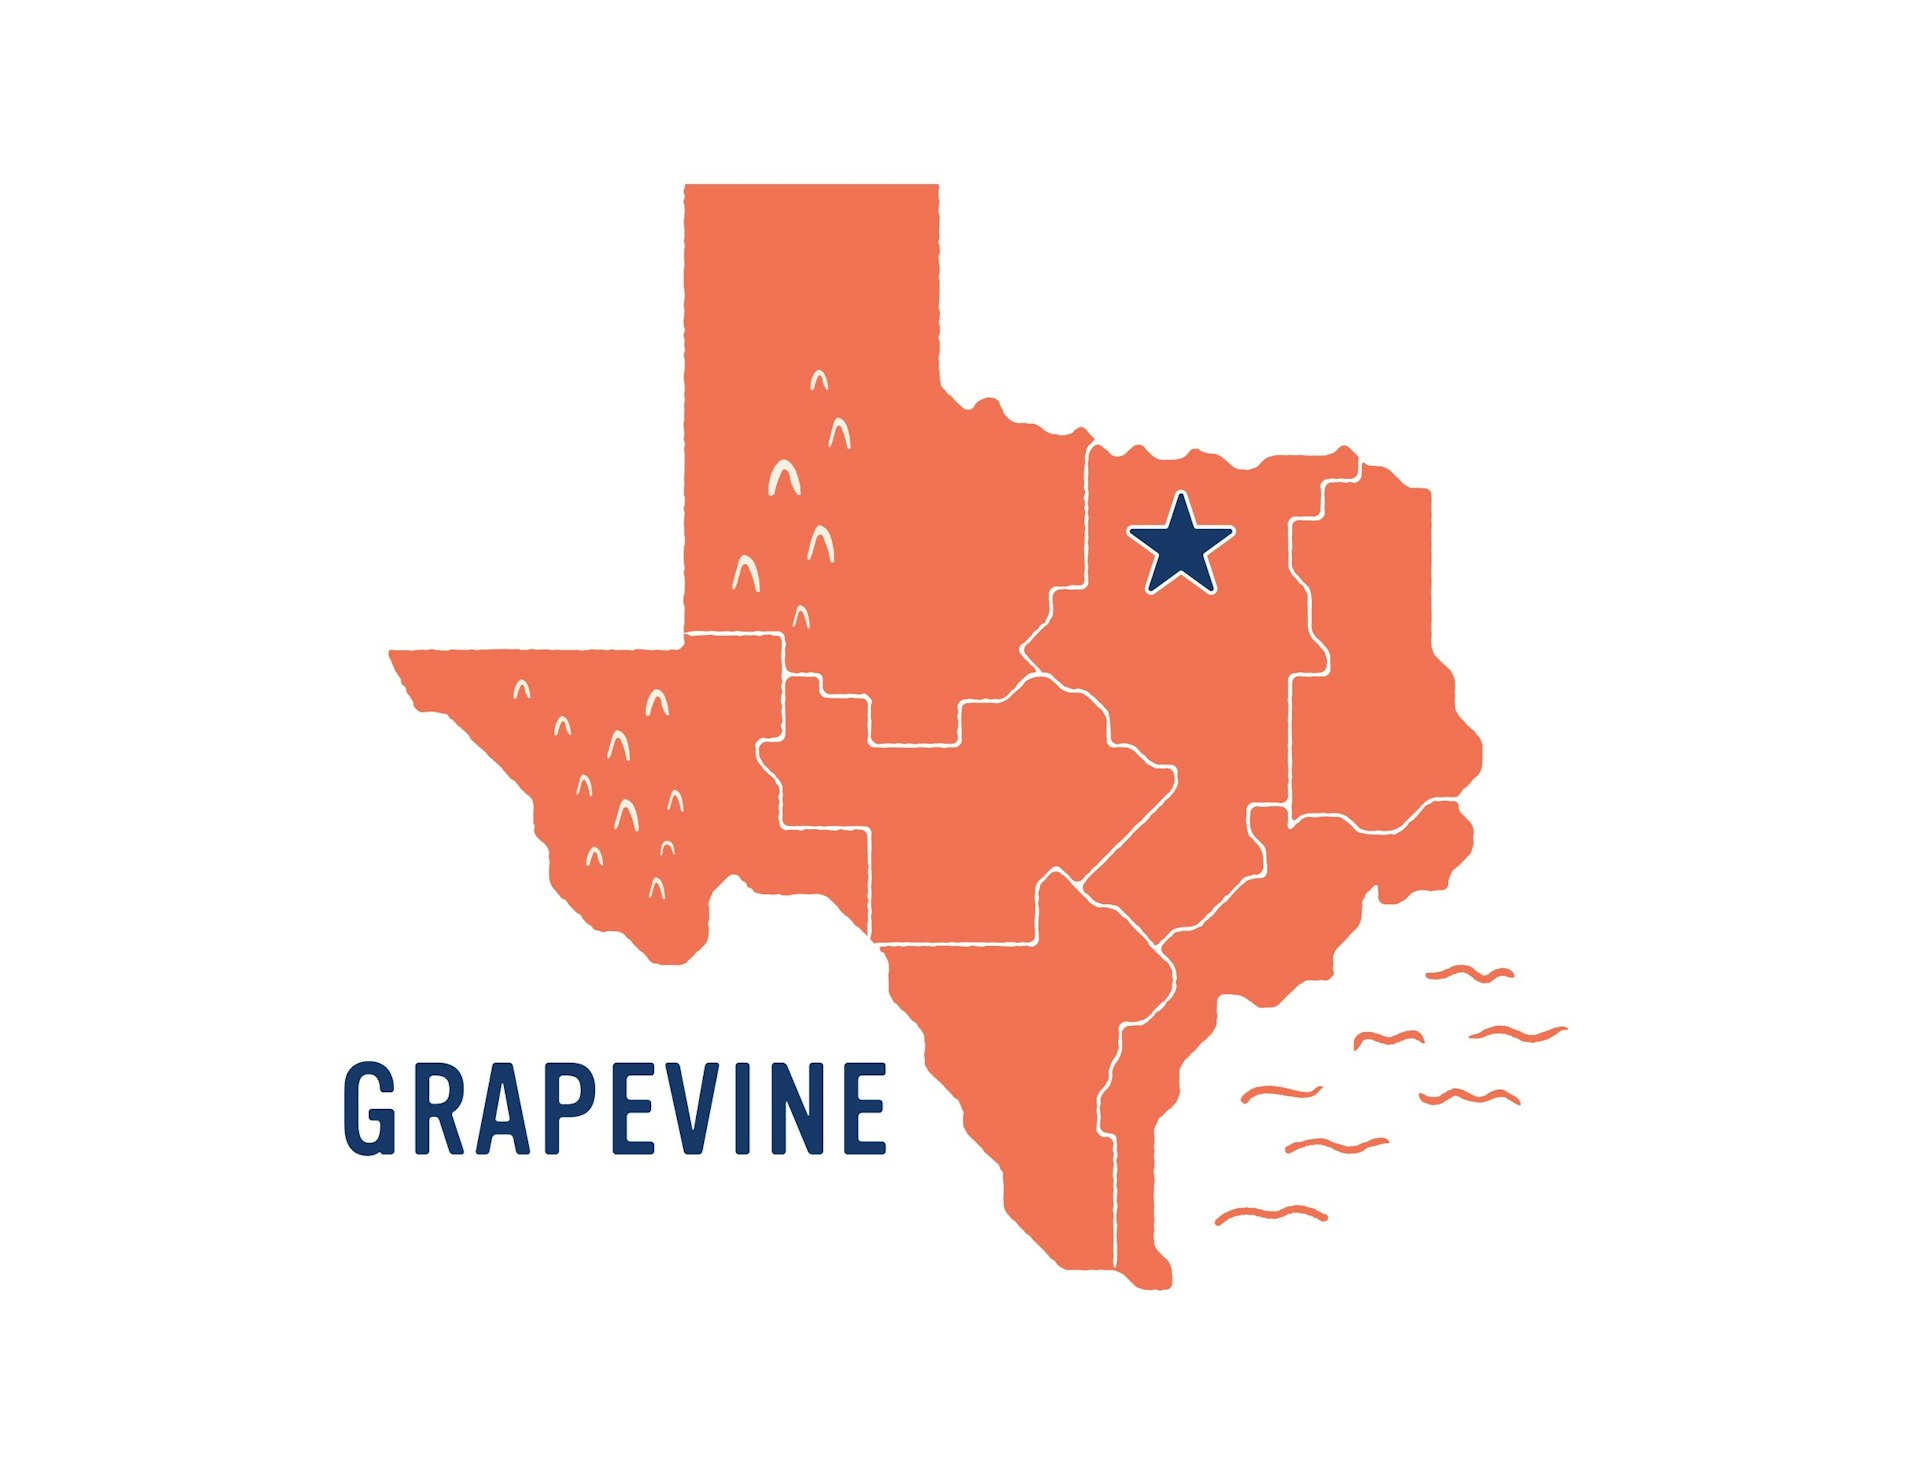 Unexpected-Texas_Grapevine_Map.jpg